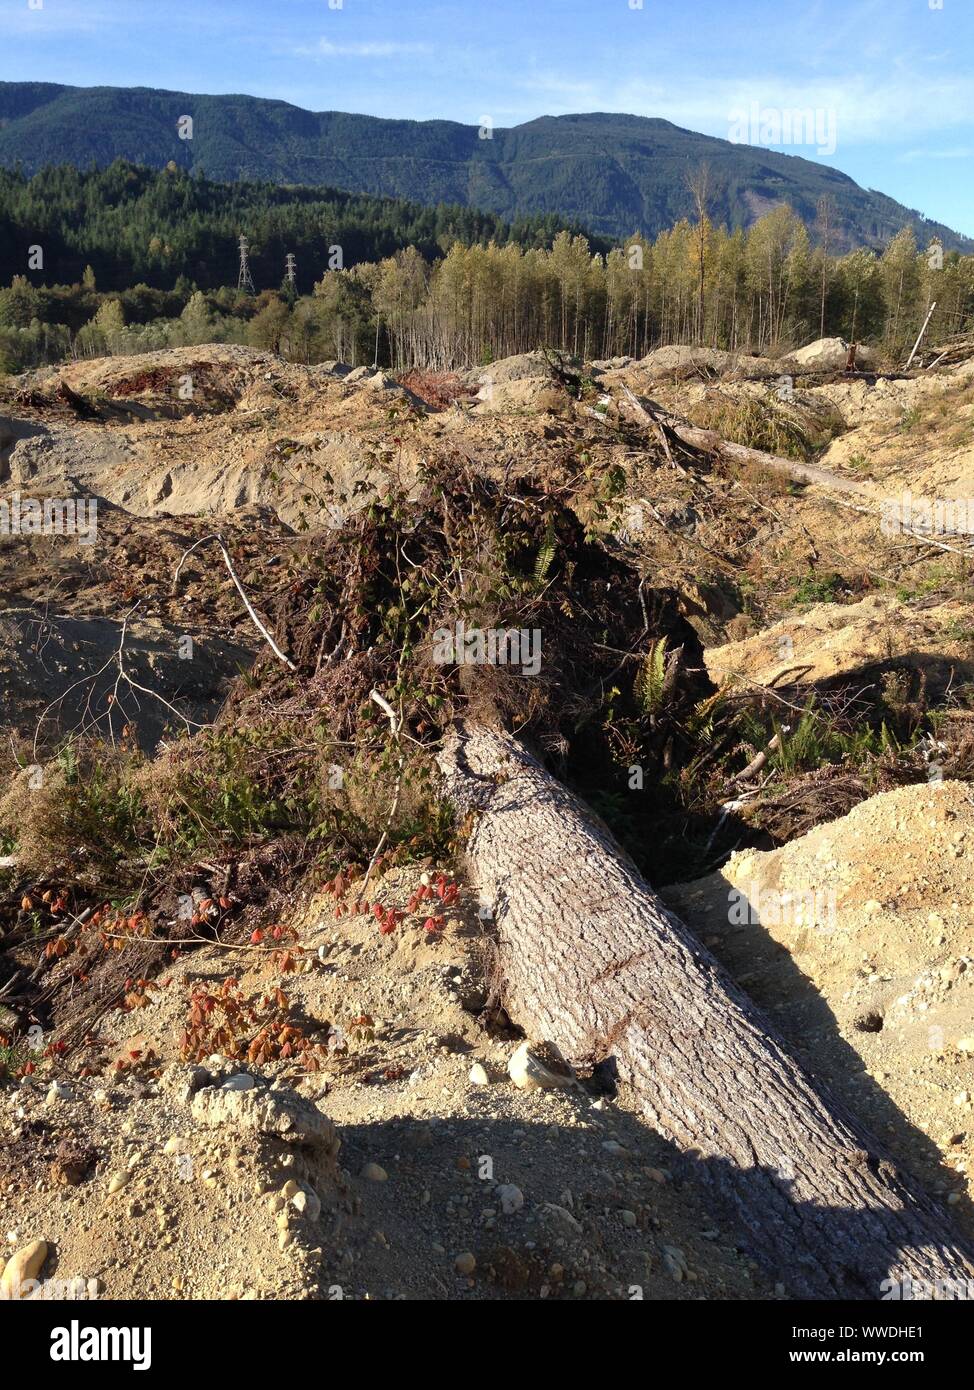 Hemlock trees knocked down by the 2014 Oso Landslide, North Fork Stillaguamish River Valley, Snohomish County, Washington, USA Stock Photo